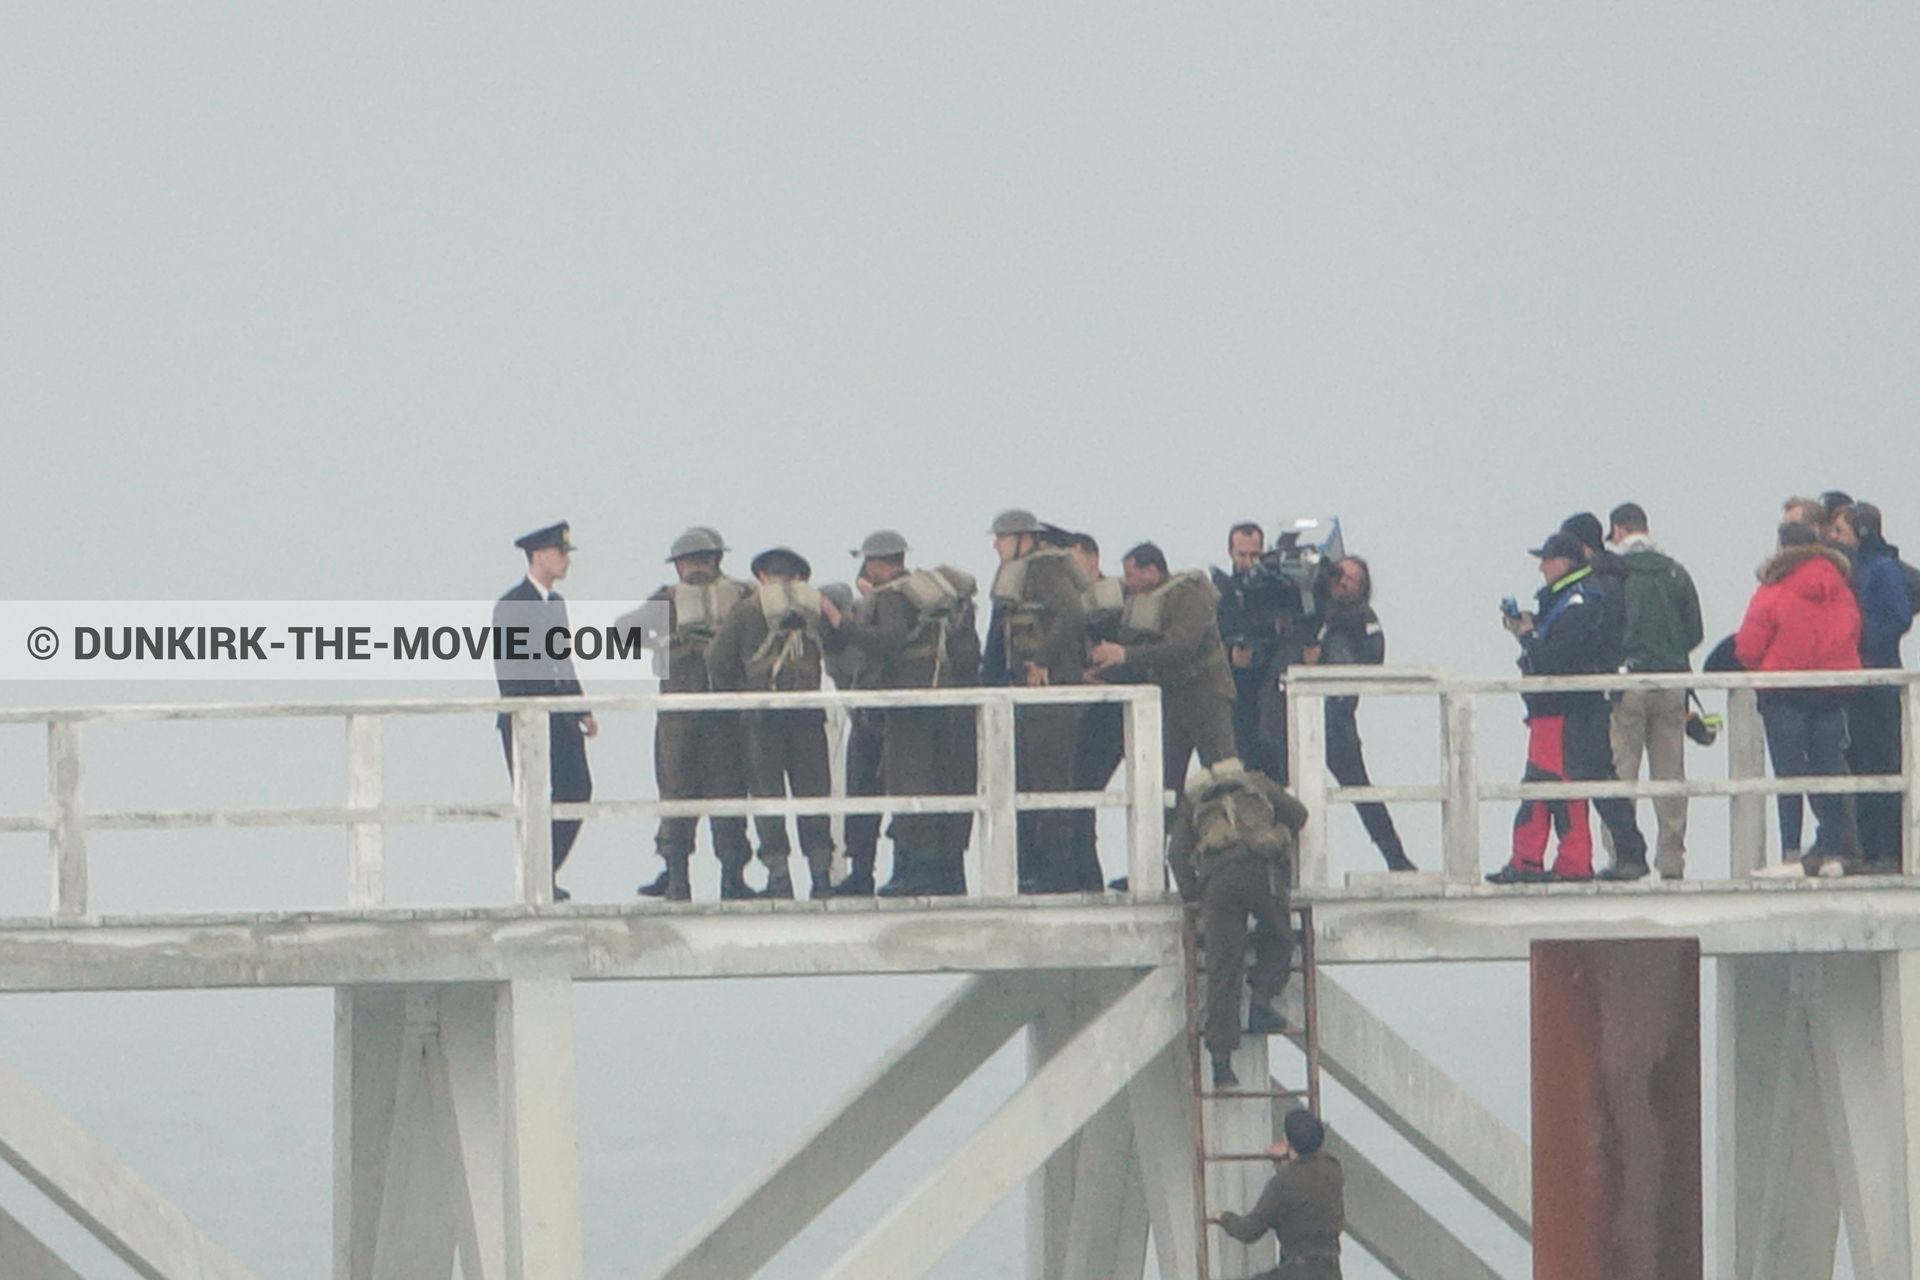 Picture with actor, IMAX camera, grey sky, supernumeraries, Hoyte van Hoytema, EST pier, technical team,  from behind the scene of the Dunkirk movie by Nolan